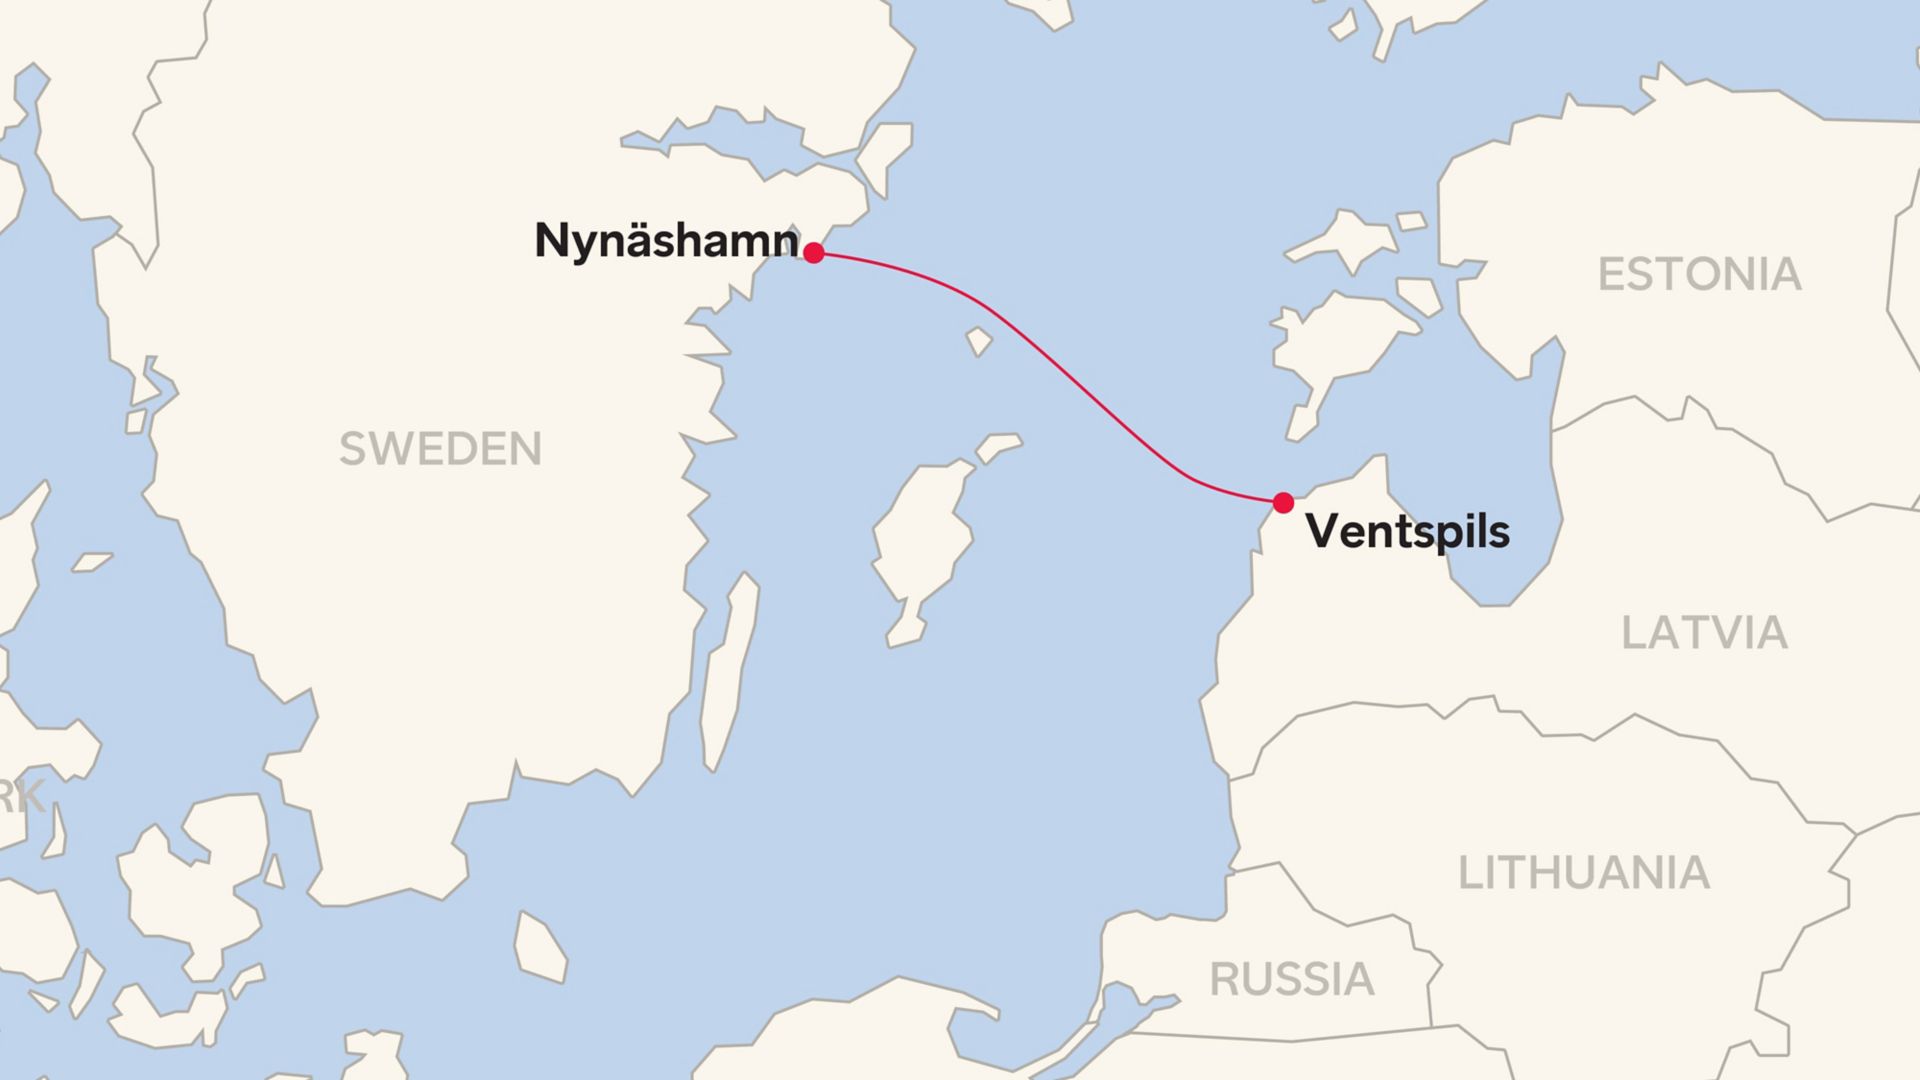 Route map  for Ventspils - Nynäshamn